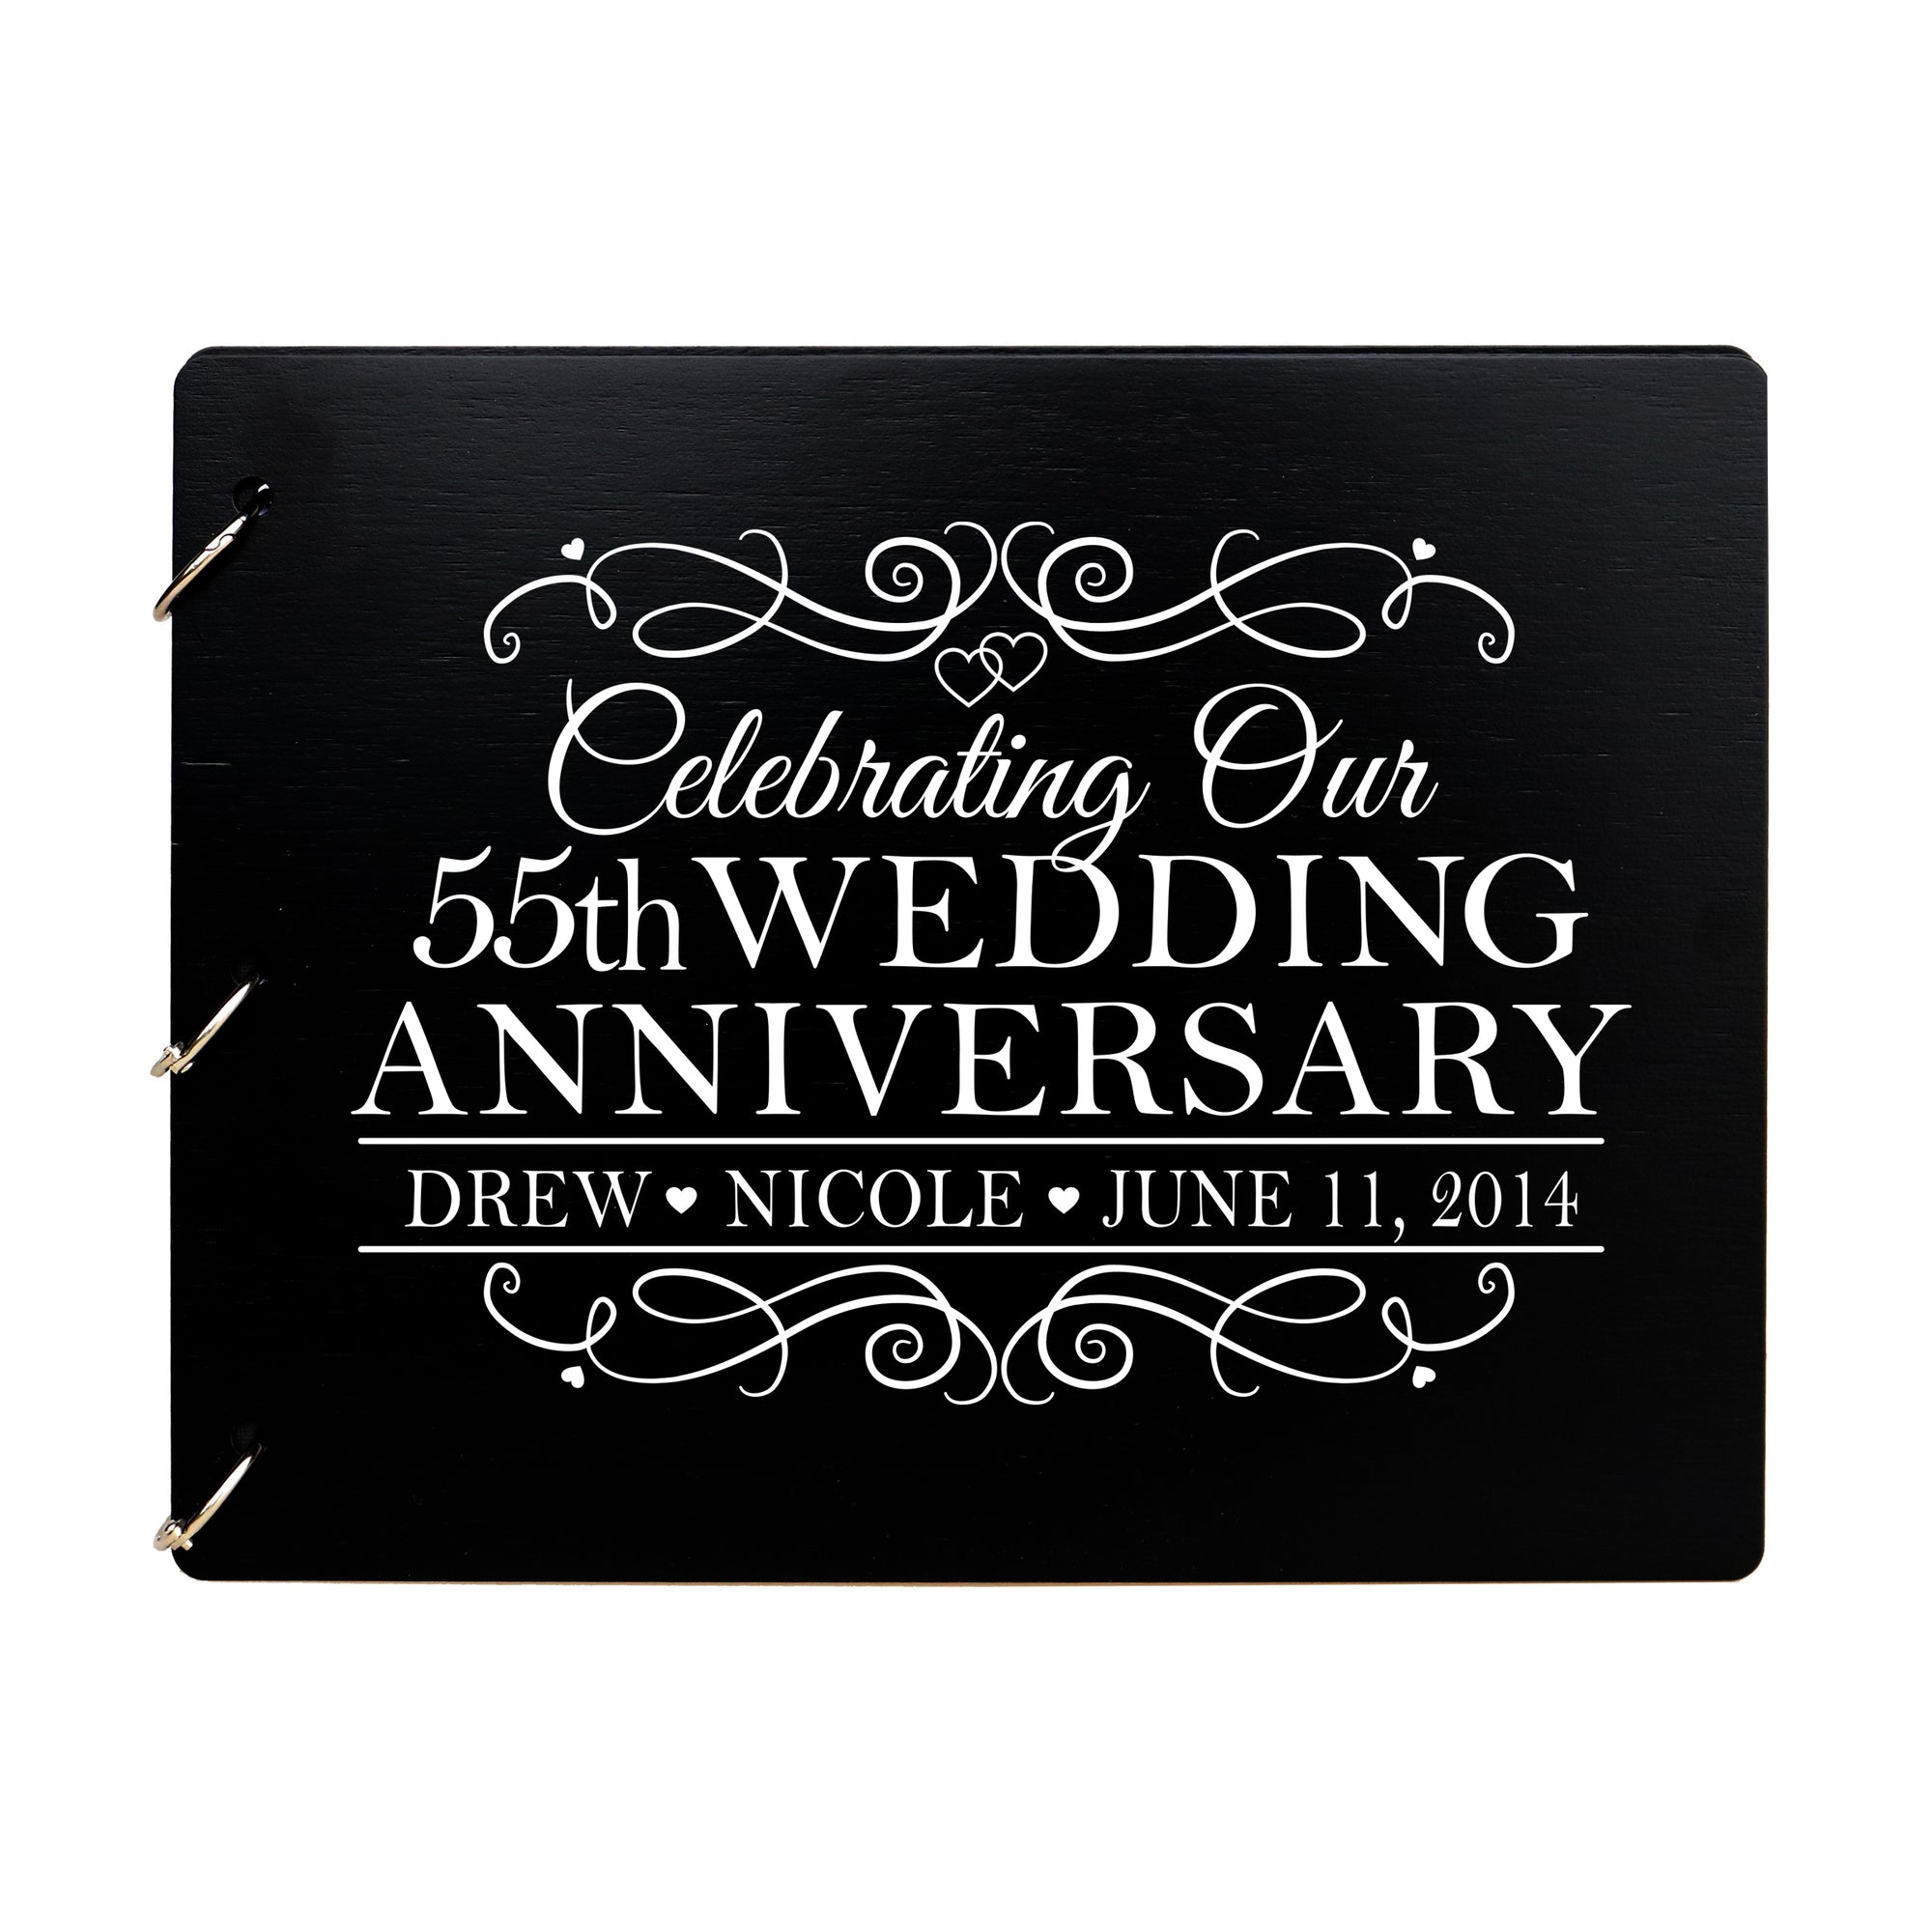 LifeSong Milestones Personalized Guestbook Sign for 55th Wedding Anniversary Gift Ideas